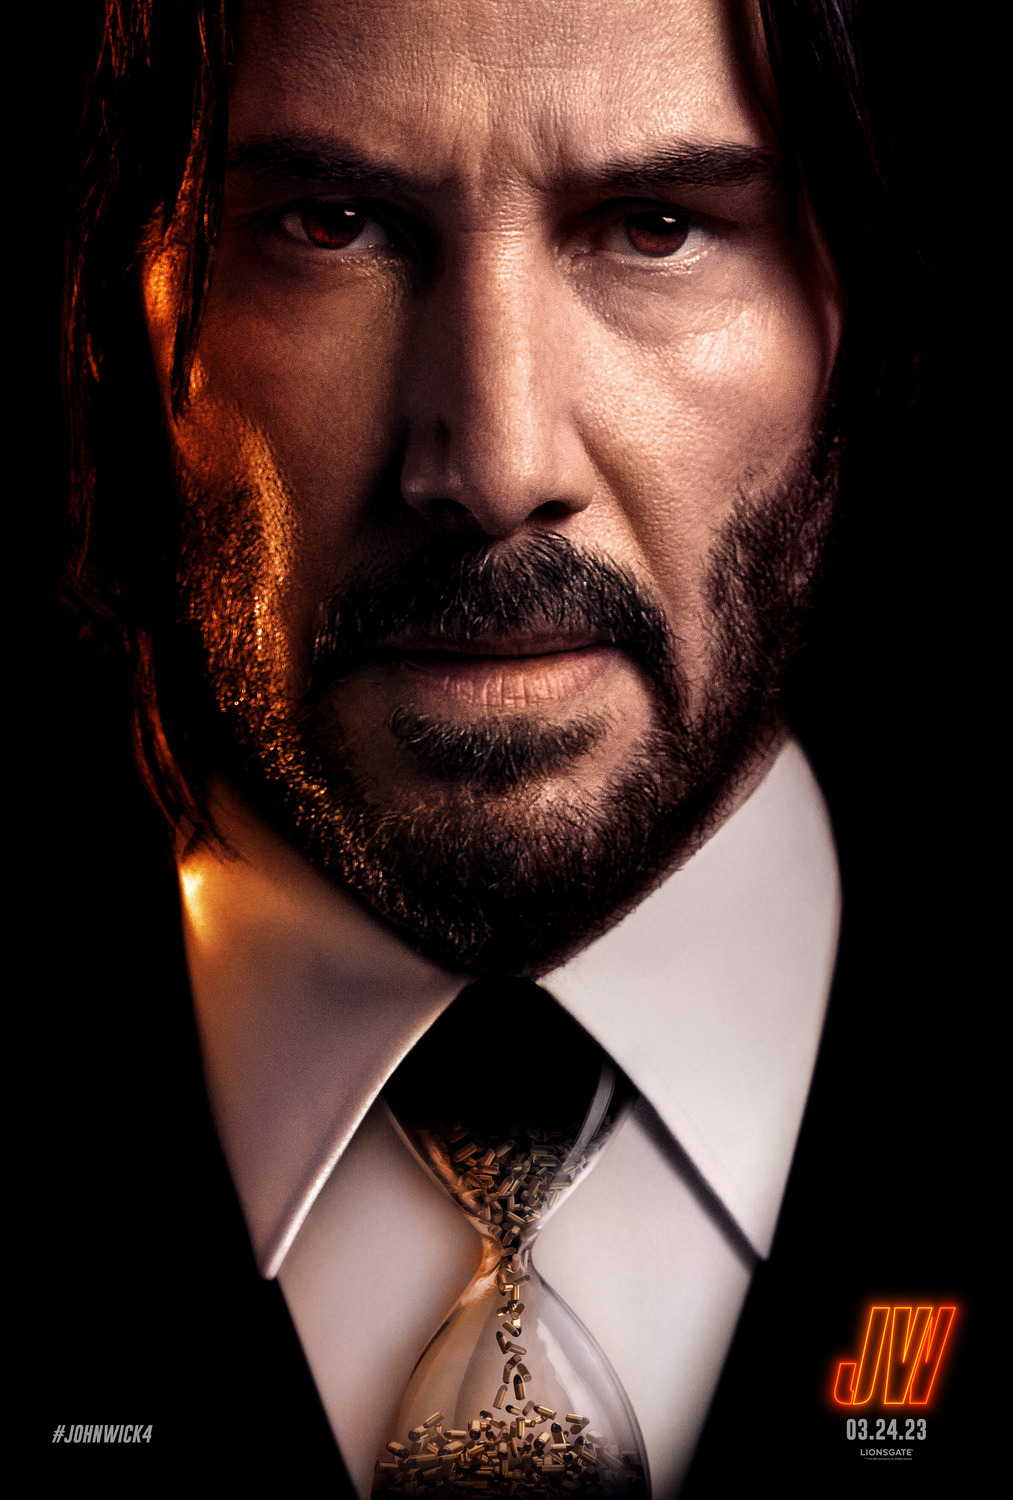 Close-up of Keanu Reeves' face. The knot and length of his tie make up an hourglass filled with bullets rather than sand.